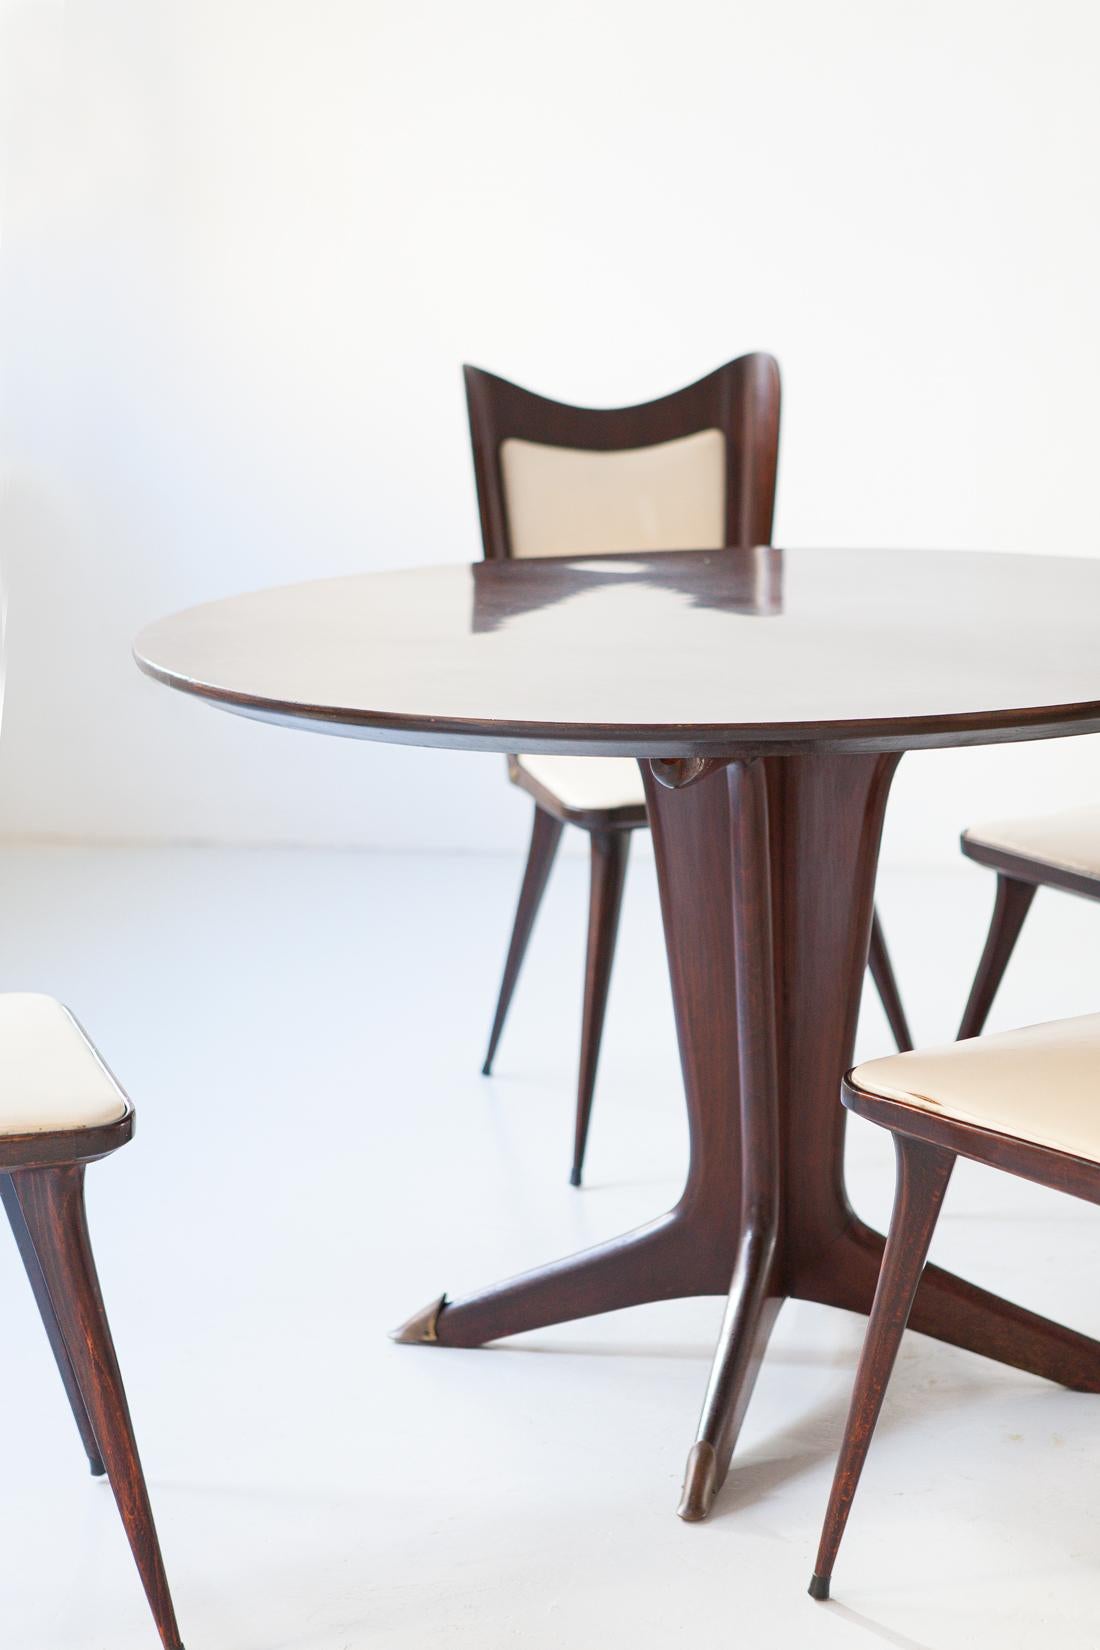 Italian Round Wooden Dining Table with 4 Chairs Set by Carlo Ratti 1